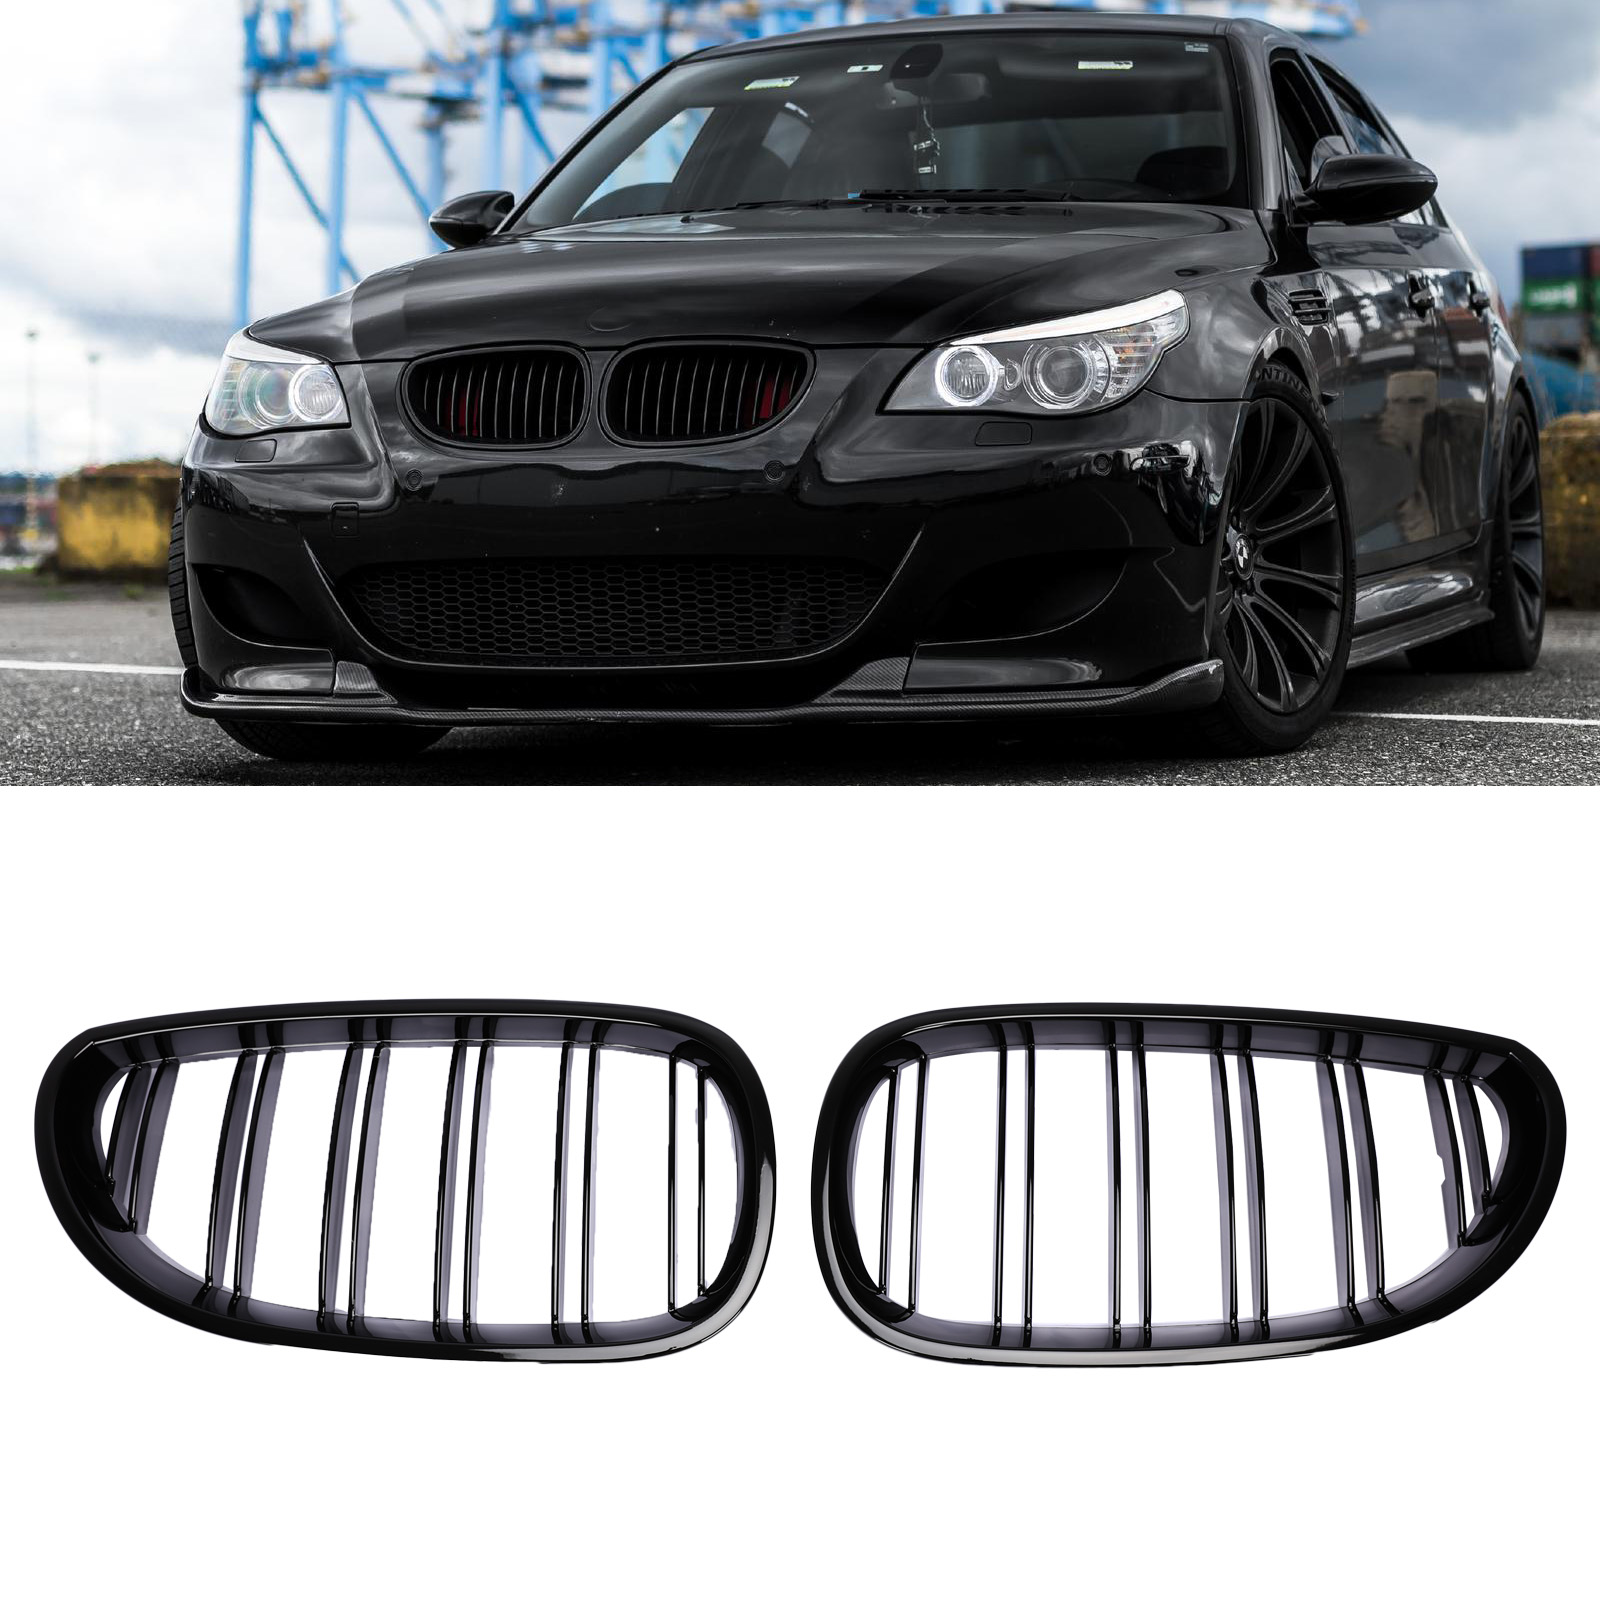 Sport grille double bar performance gloss fit for BMW 5 Series E60